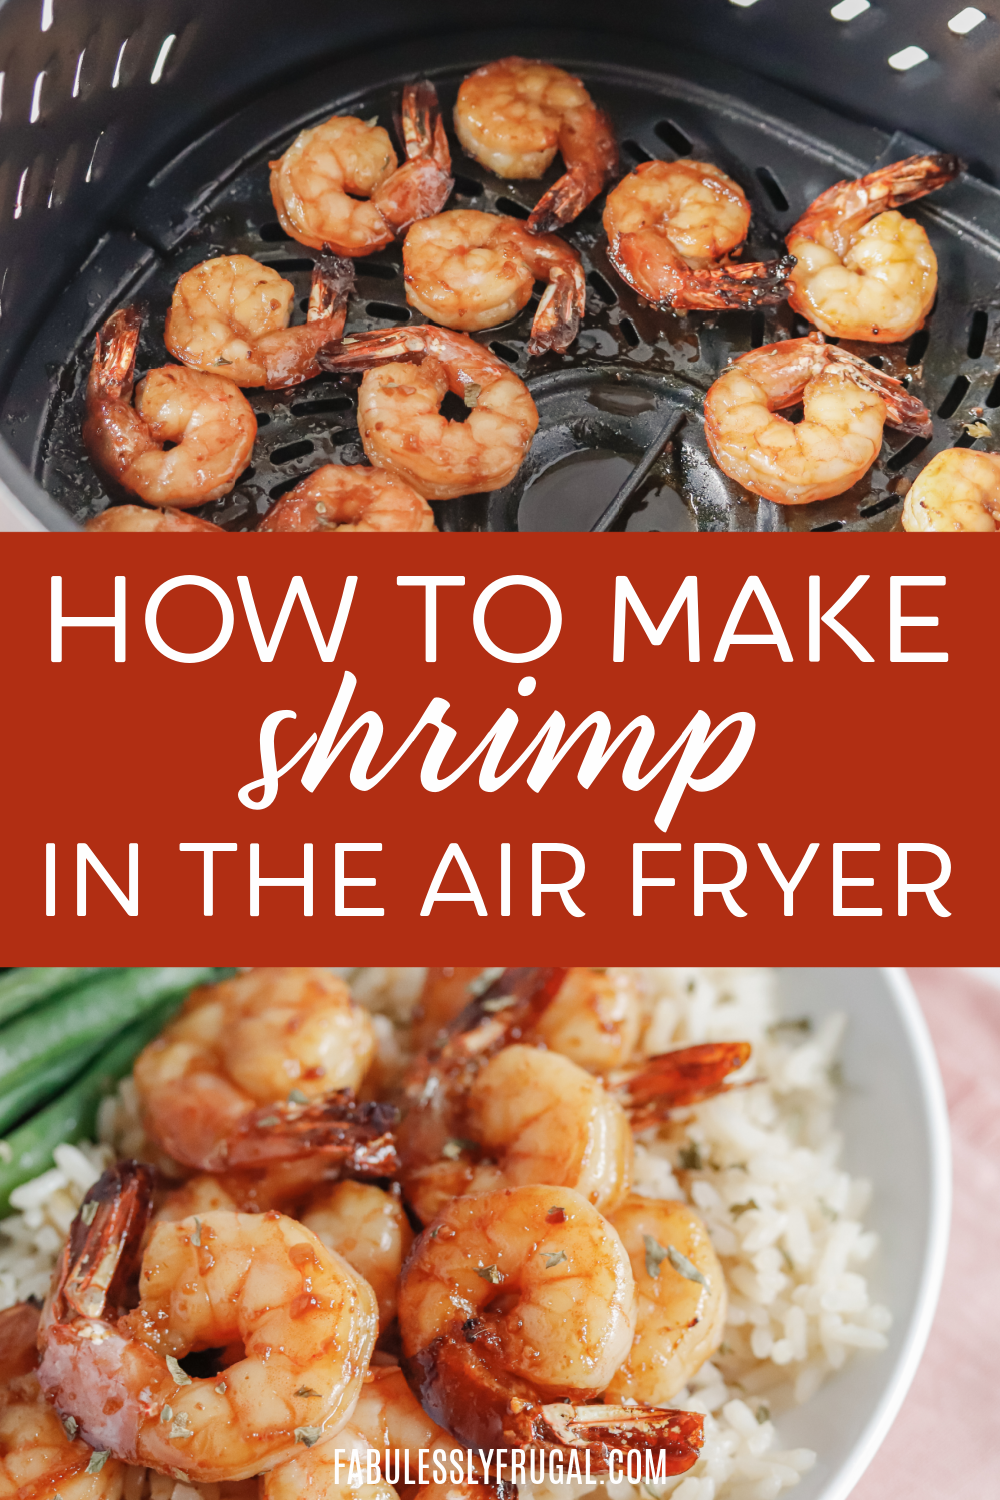 Honey garlic shrimp in the air fryer is simple, flavorful, and a great weeknight recipe